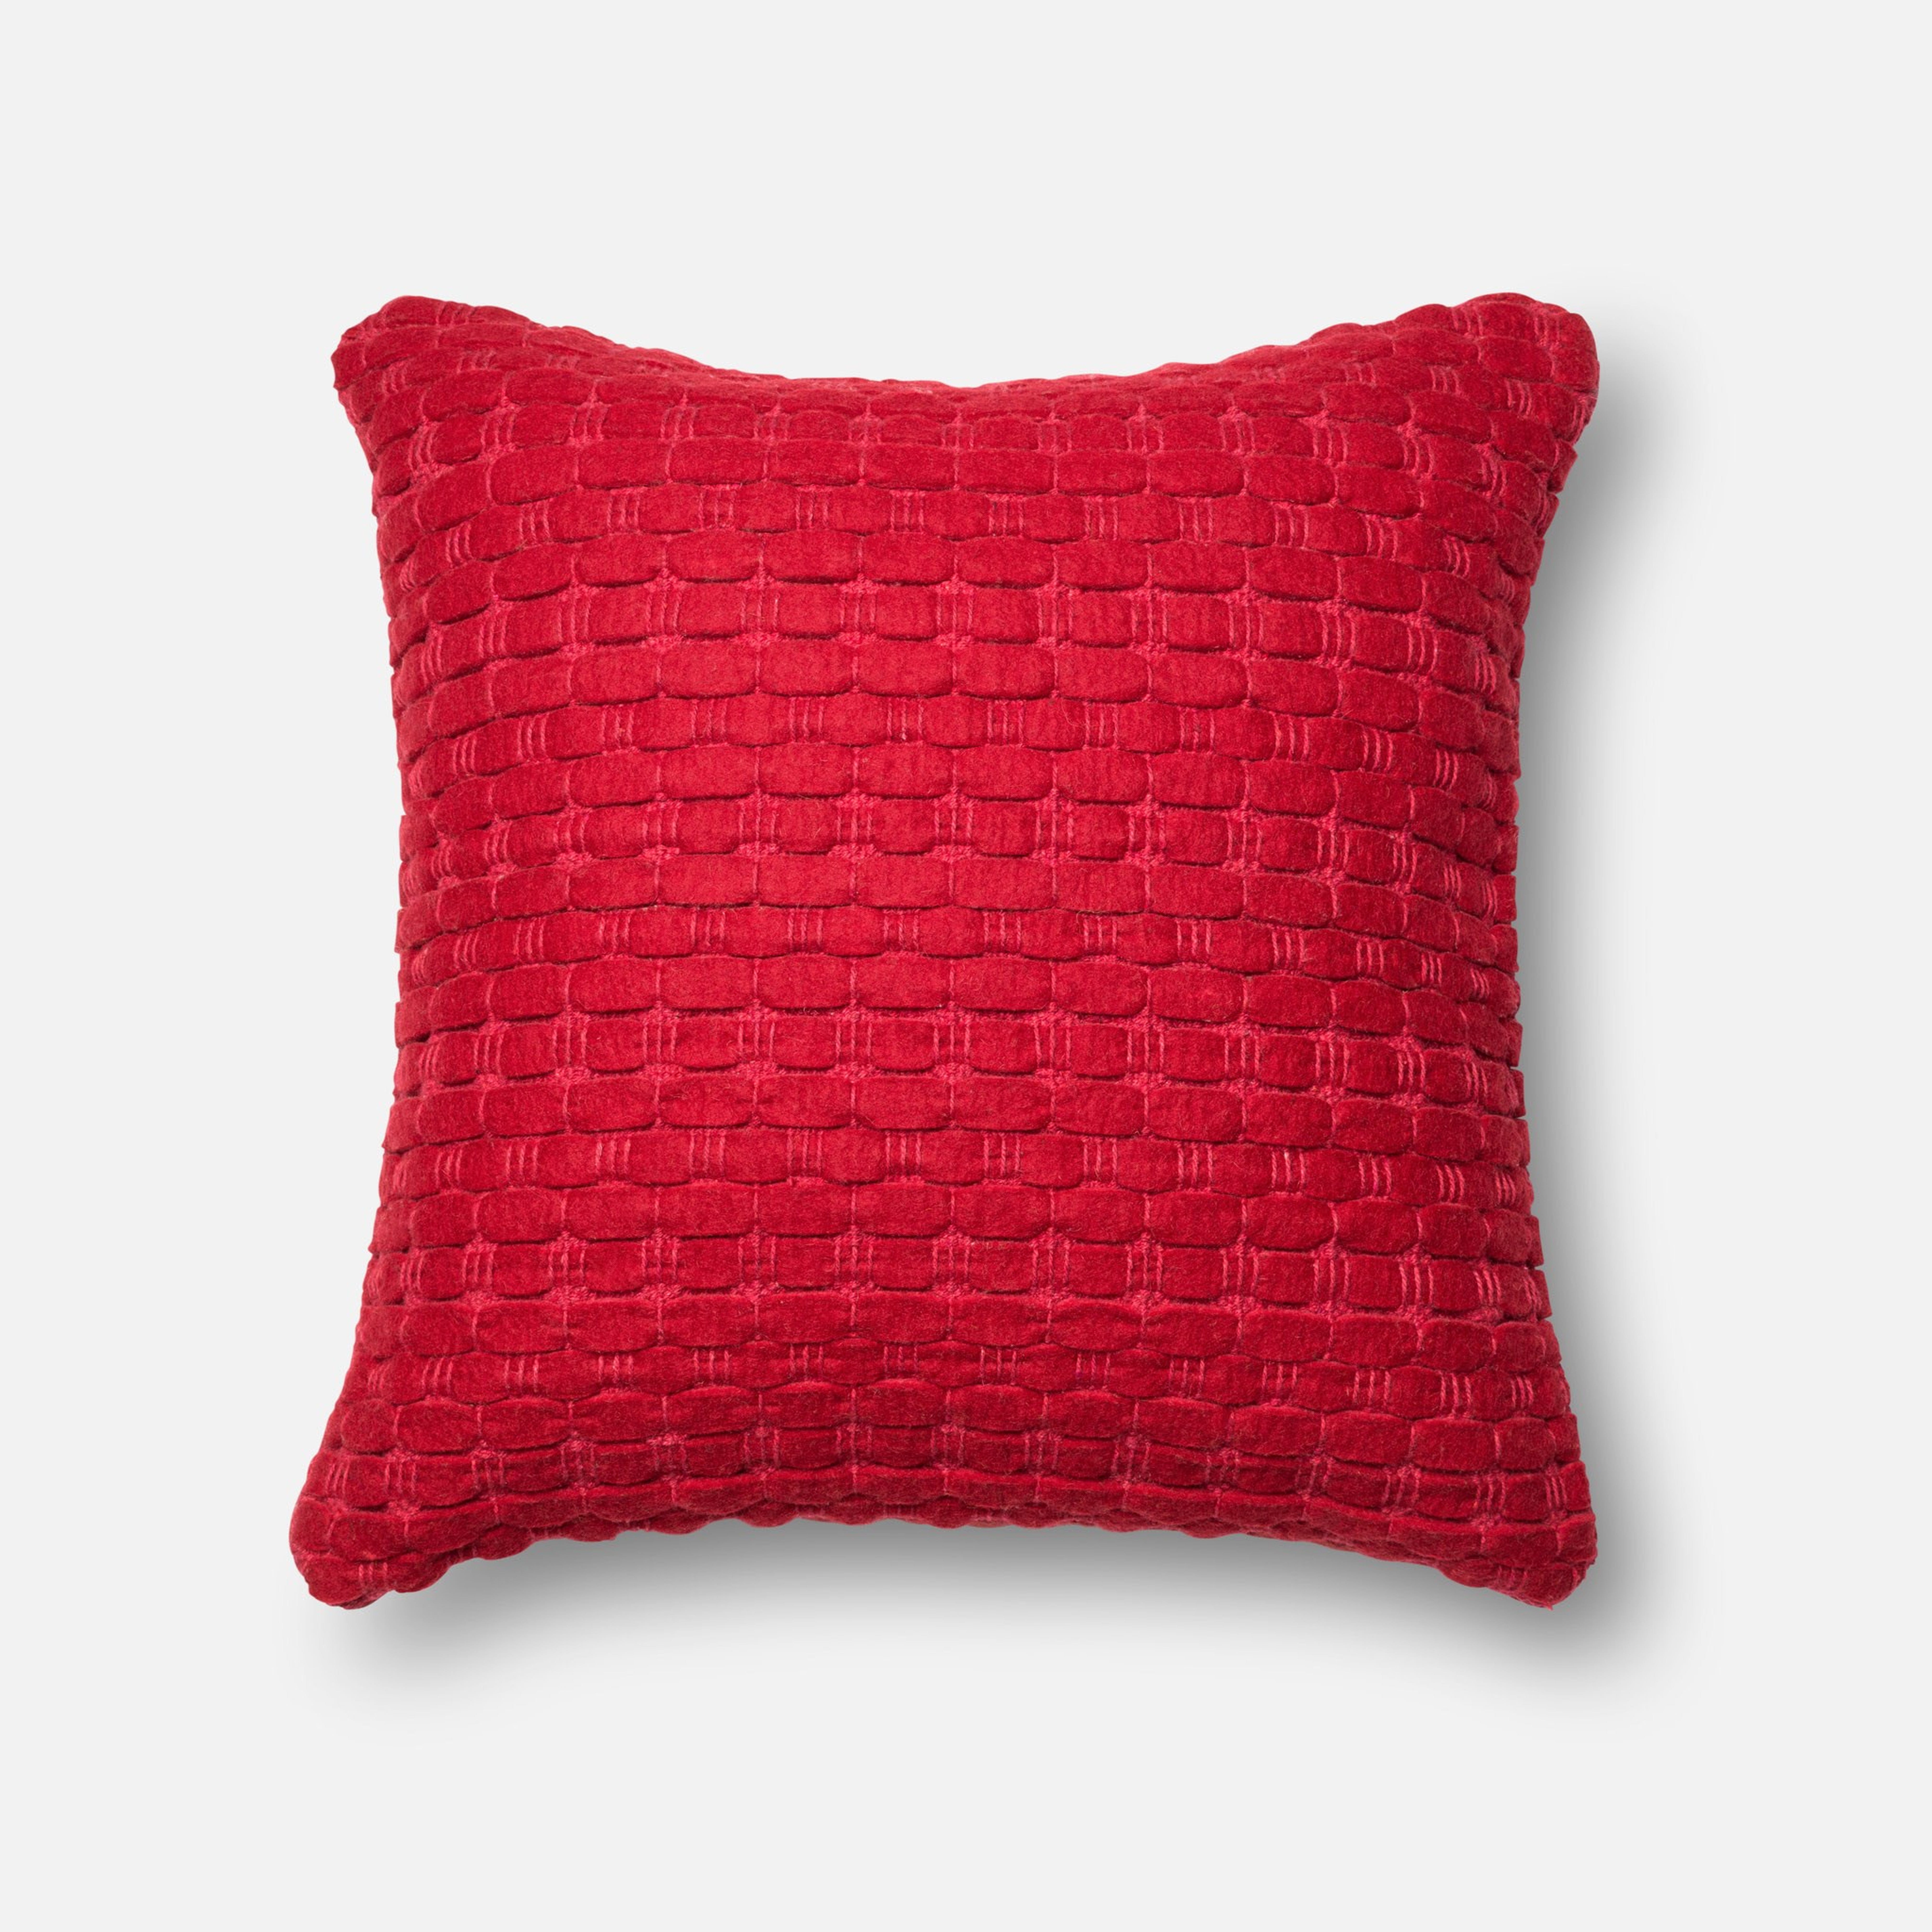 PILLOWS - RED - 22" X 22" Cover w/Down - Loloi II